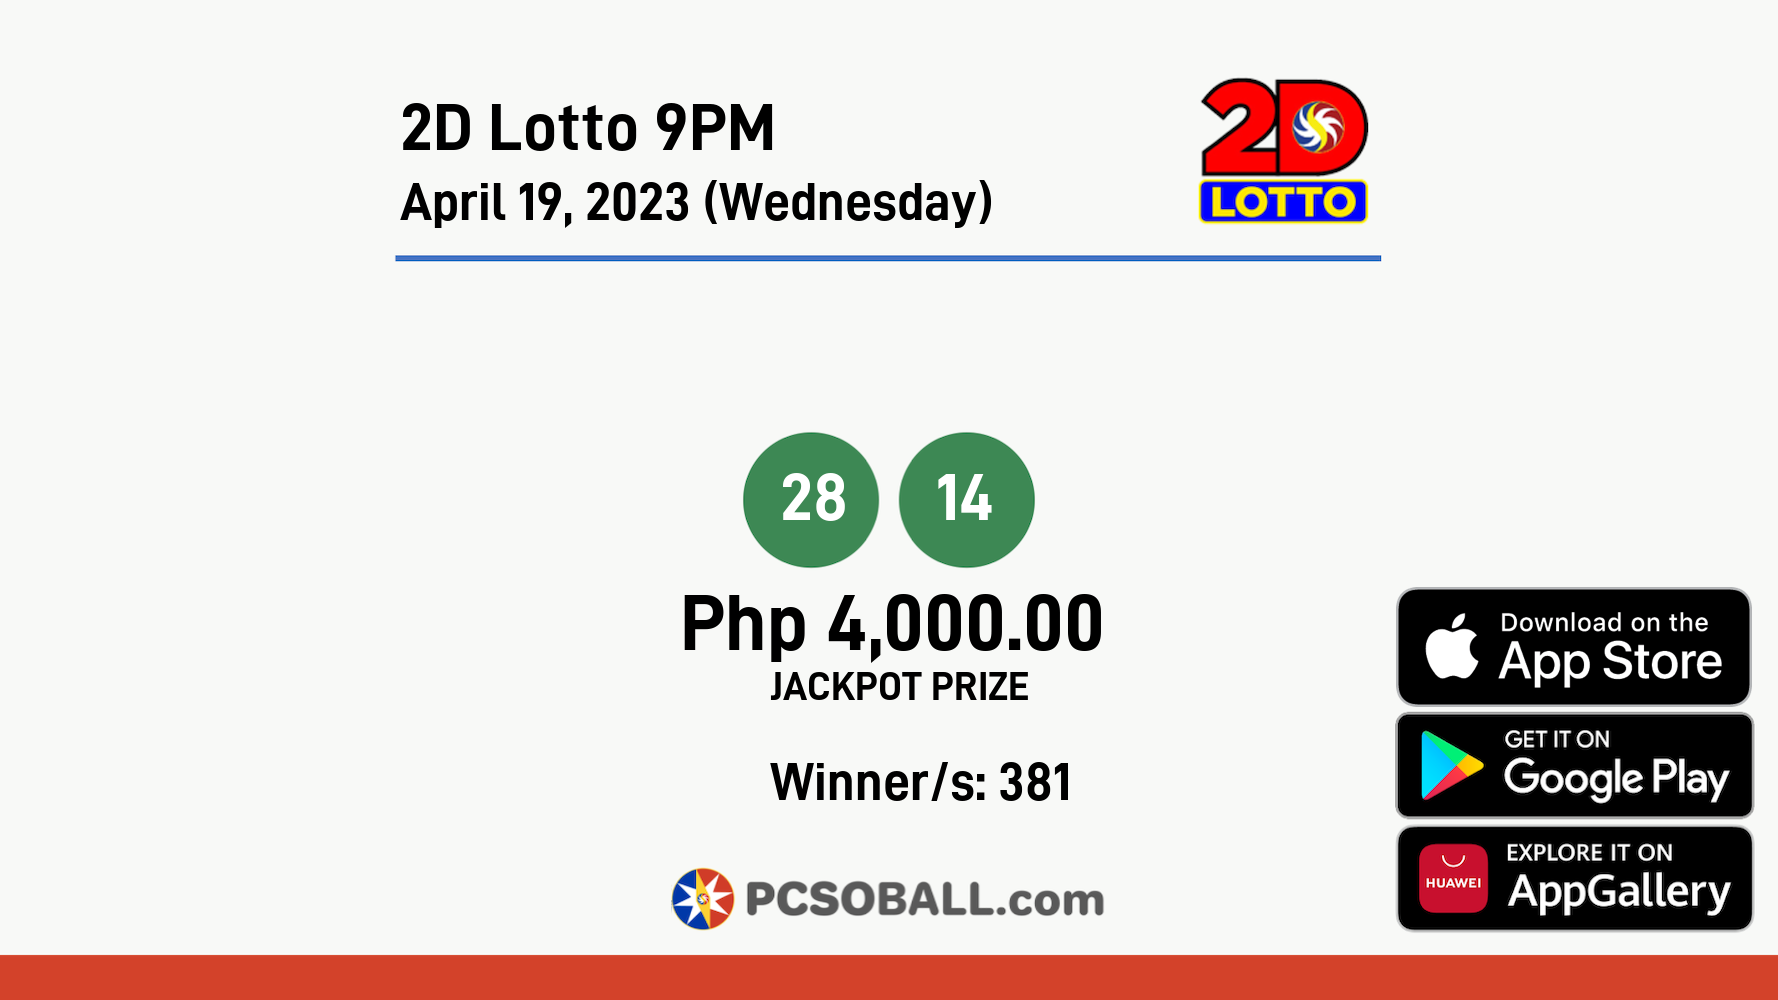 2D Lotto 9PM April 19, 2023 (Wednesday) Result